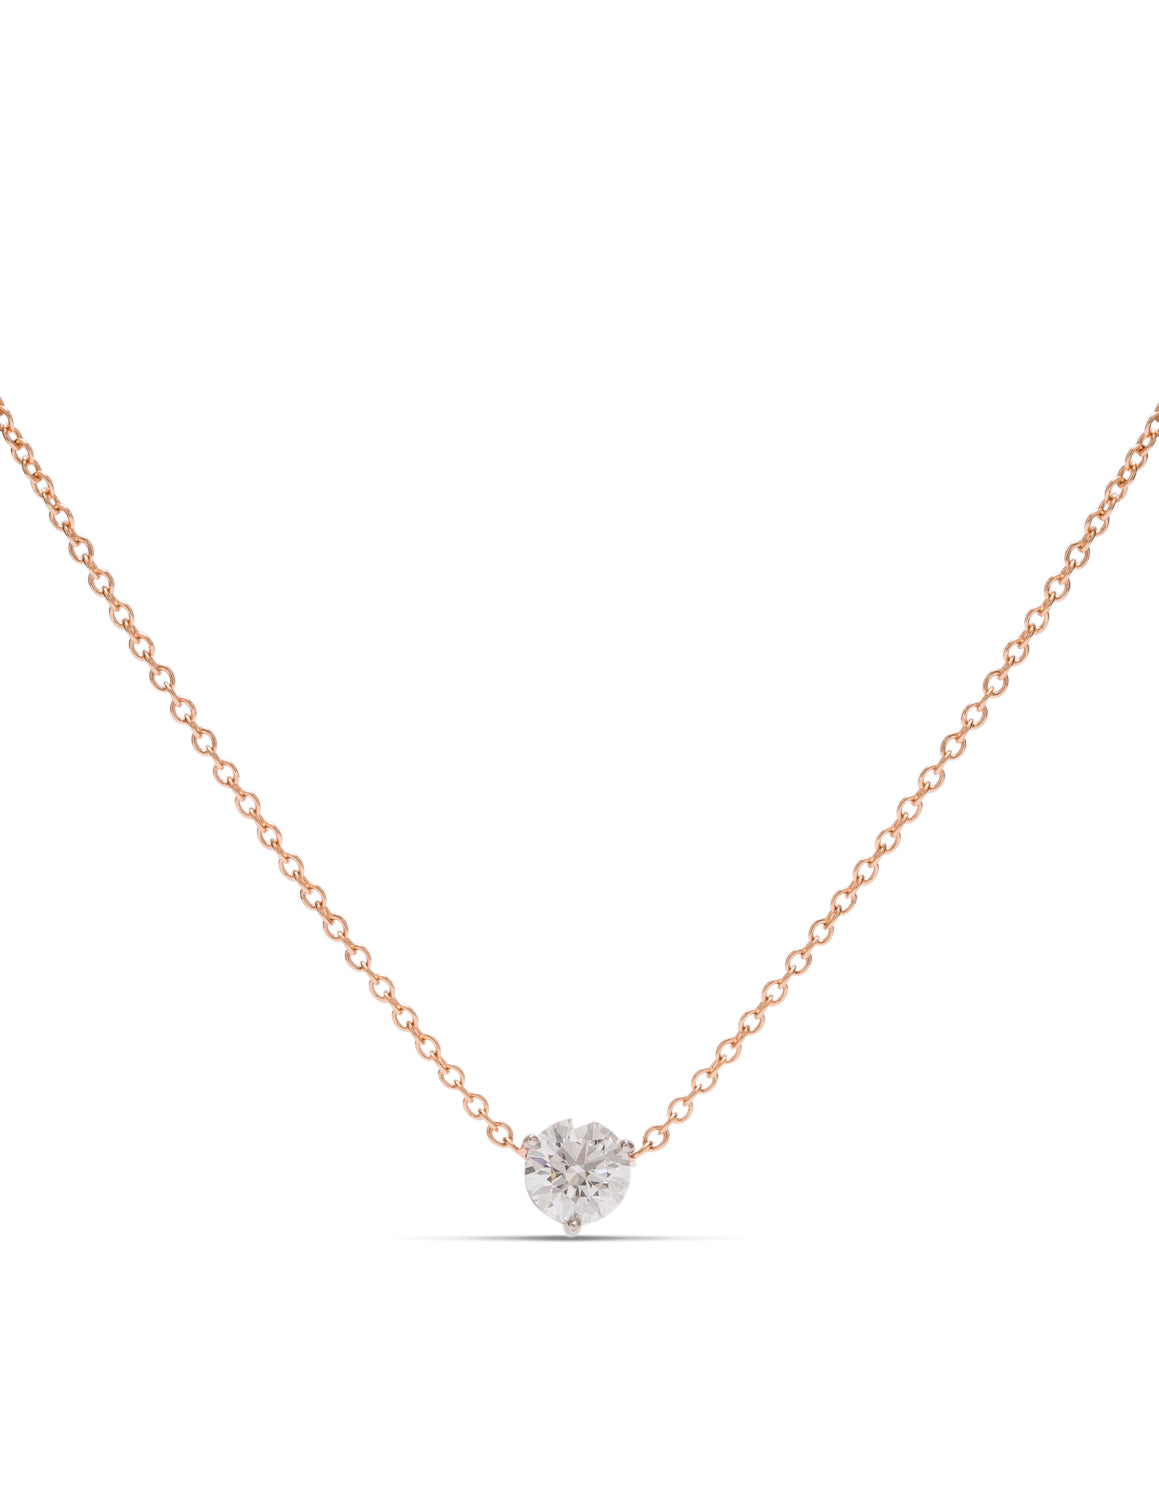 18k Rose Gold & Platinum Hearts on Fire Diamond Necklace - Charles Koll Jewellers